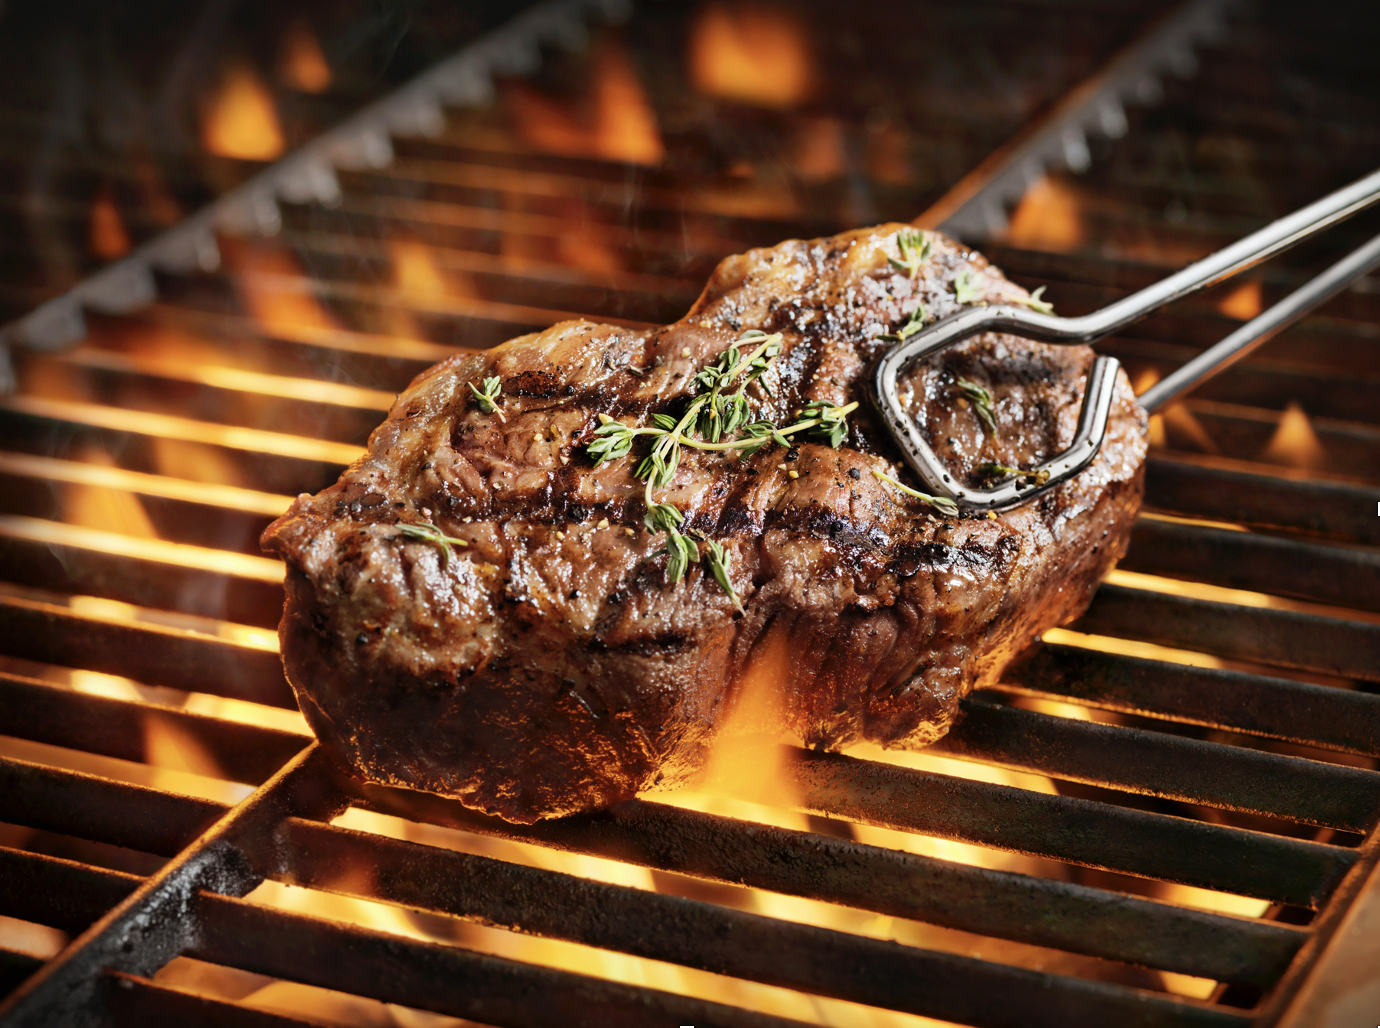 Picture of steak on a grill--for story about AML Compliance and money laundering related to major theft from meatpacking plants